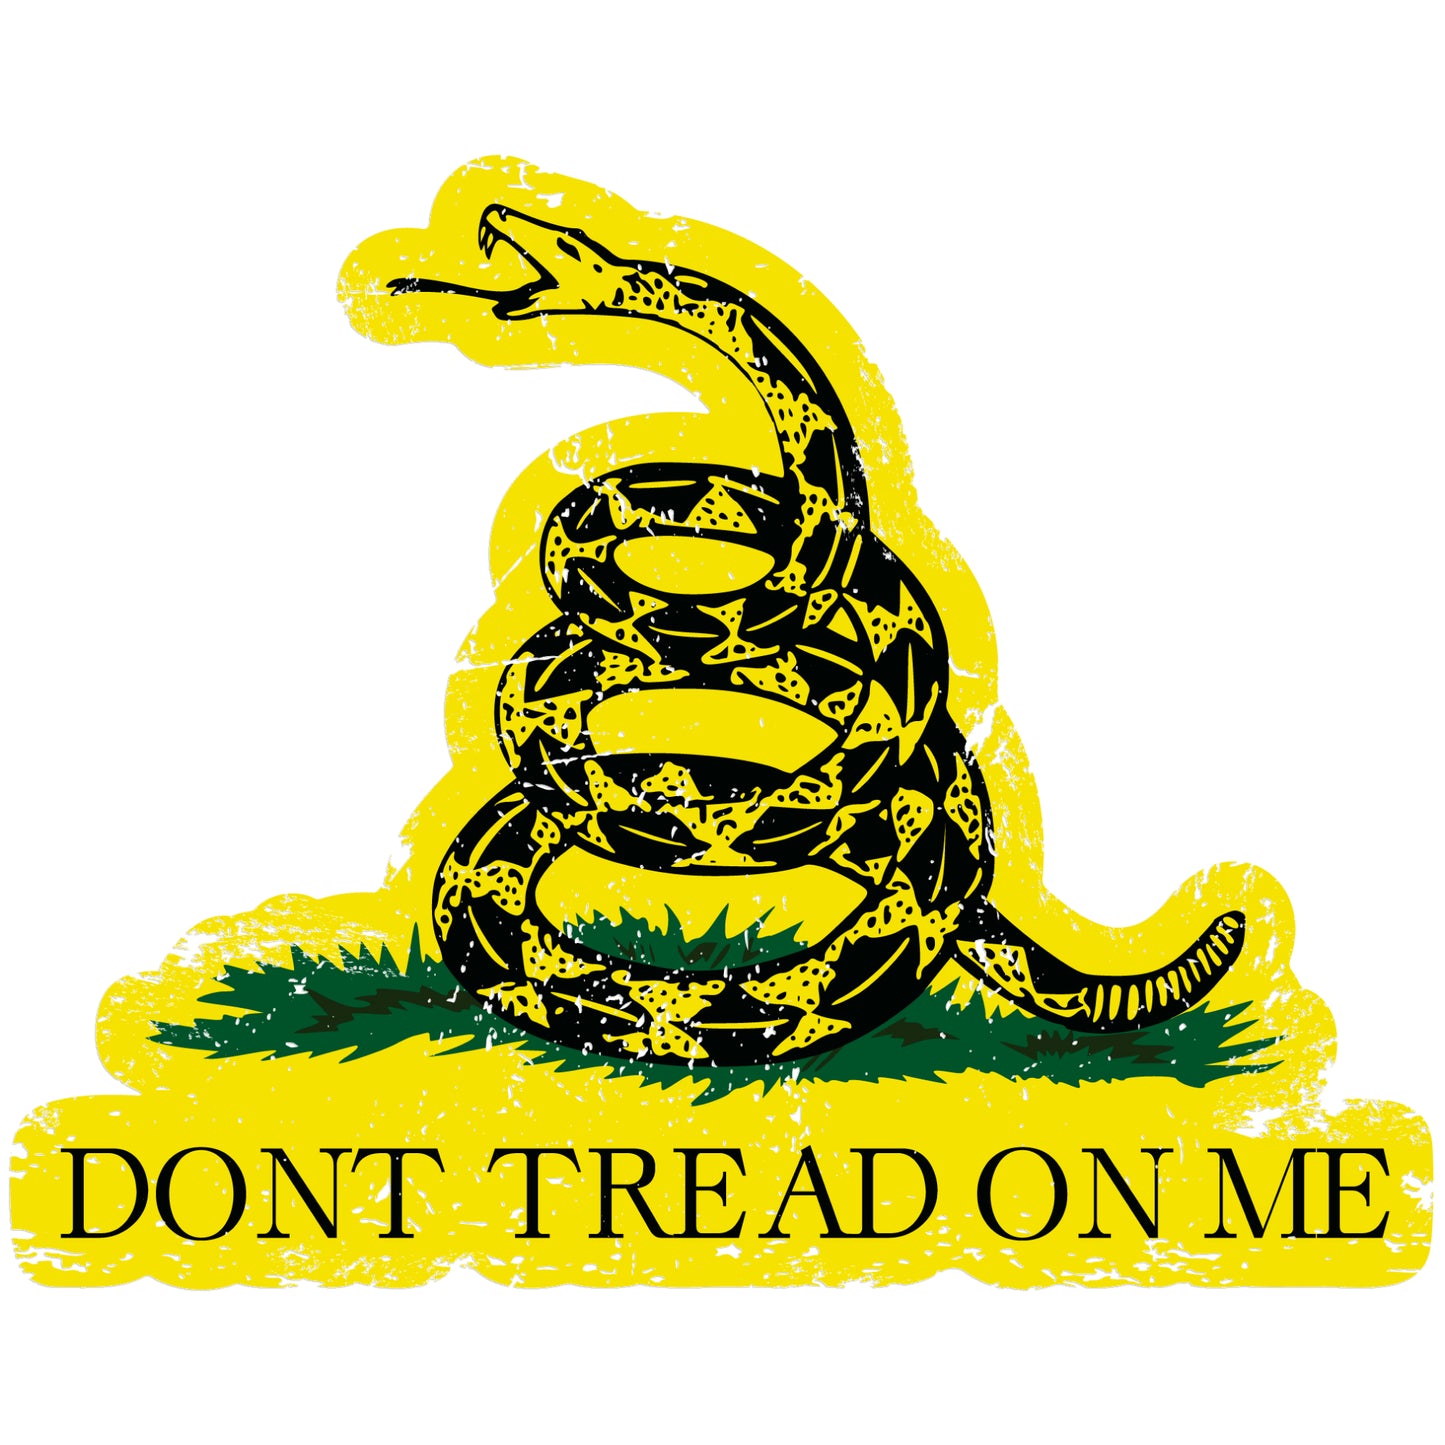 Dont Tread On Me - American Flag Decal - Gadsden Rattlers (2-Pack)